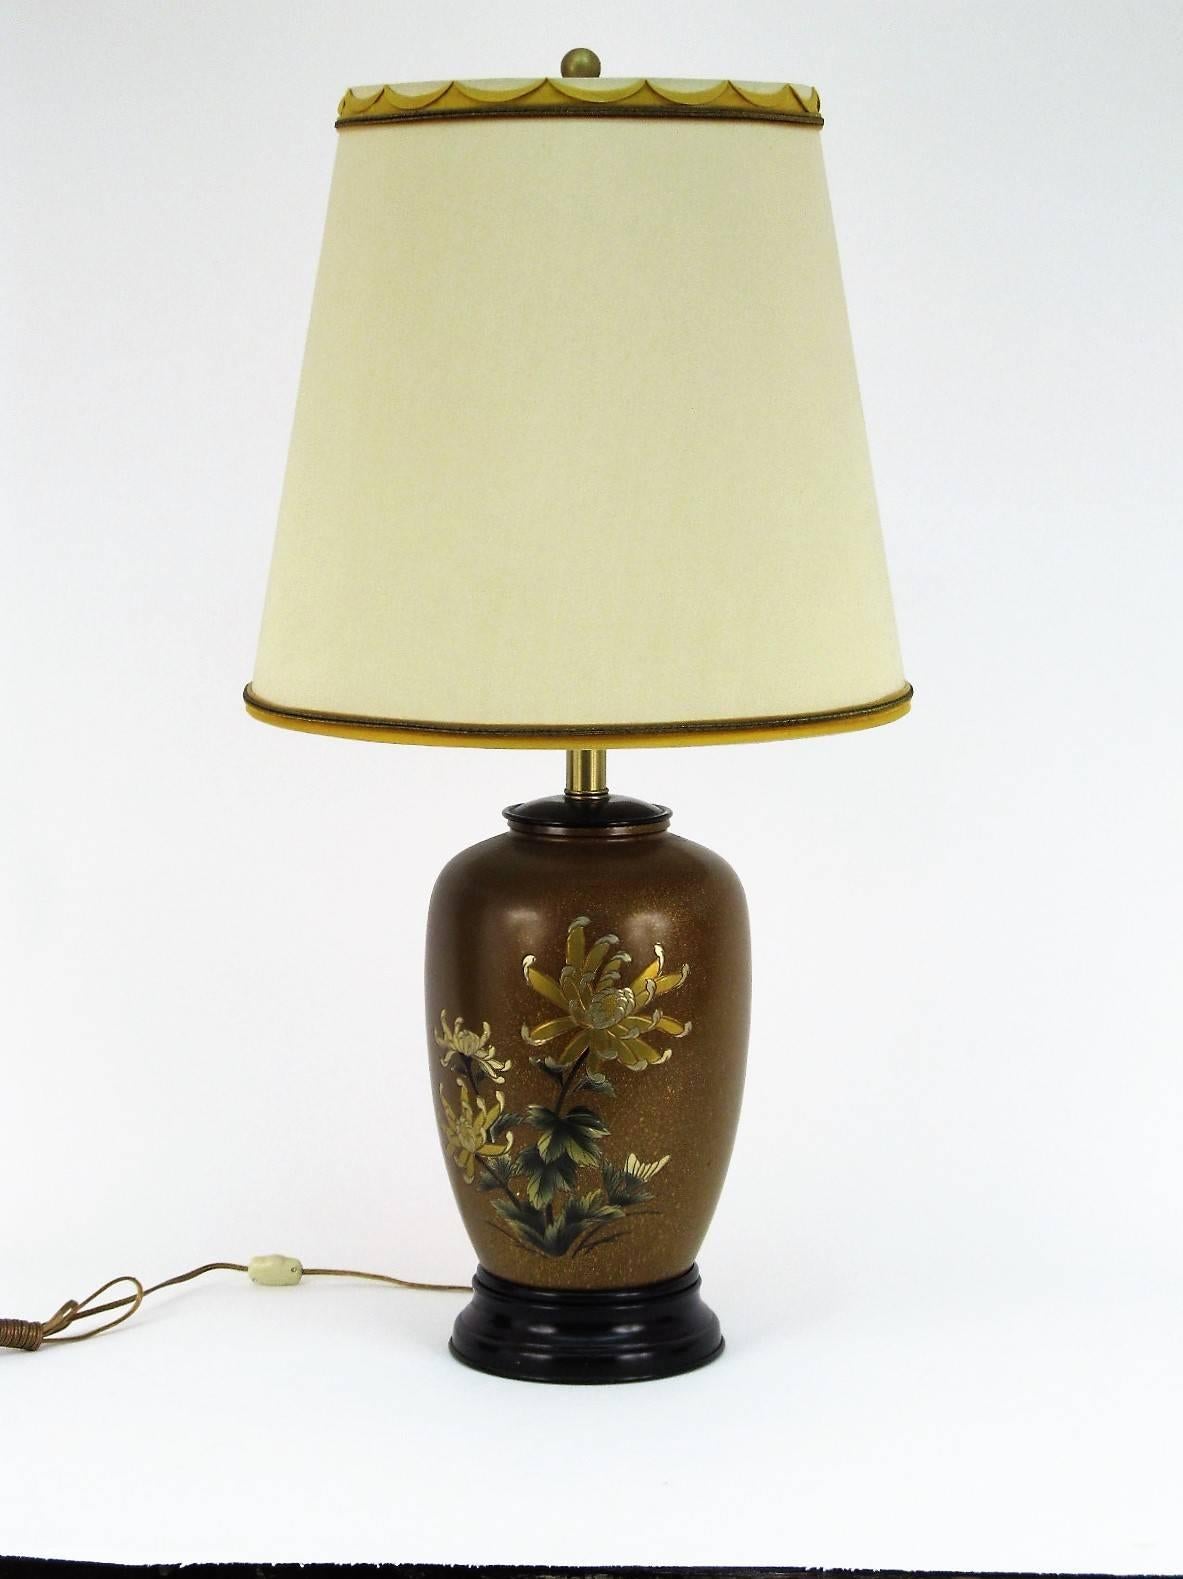 The condition of this lamp is immaculate. It comes with the original shade, and finial. And the shade is also beautifully decorated with trim at the top and bottom. It has a three way socket switch, as well as an on/off line switch. Marbro Label